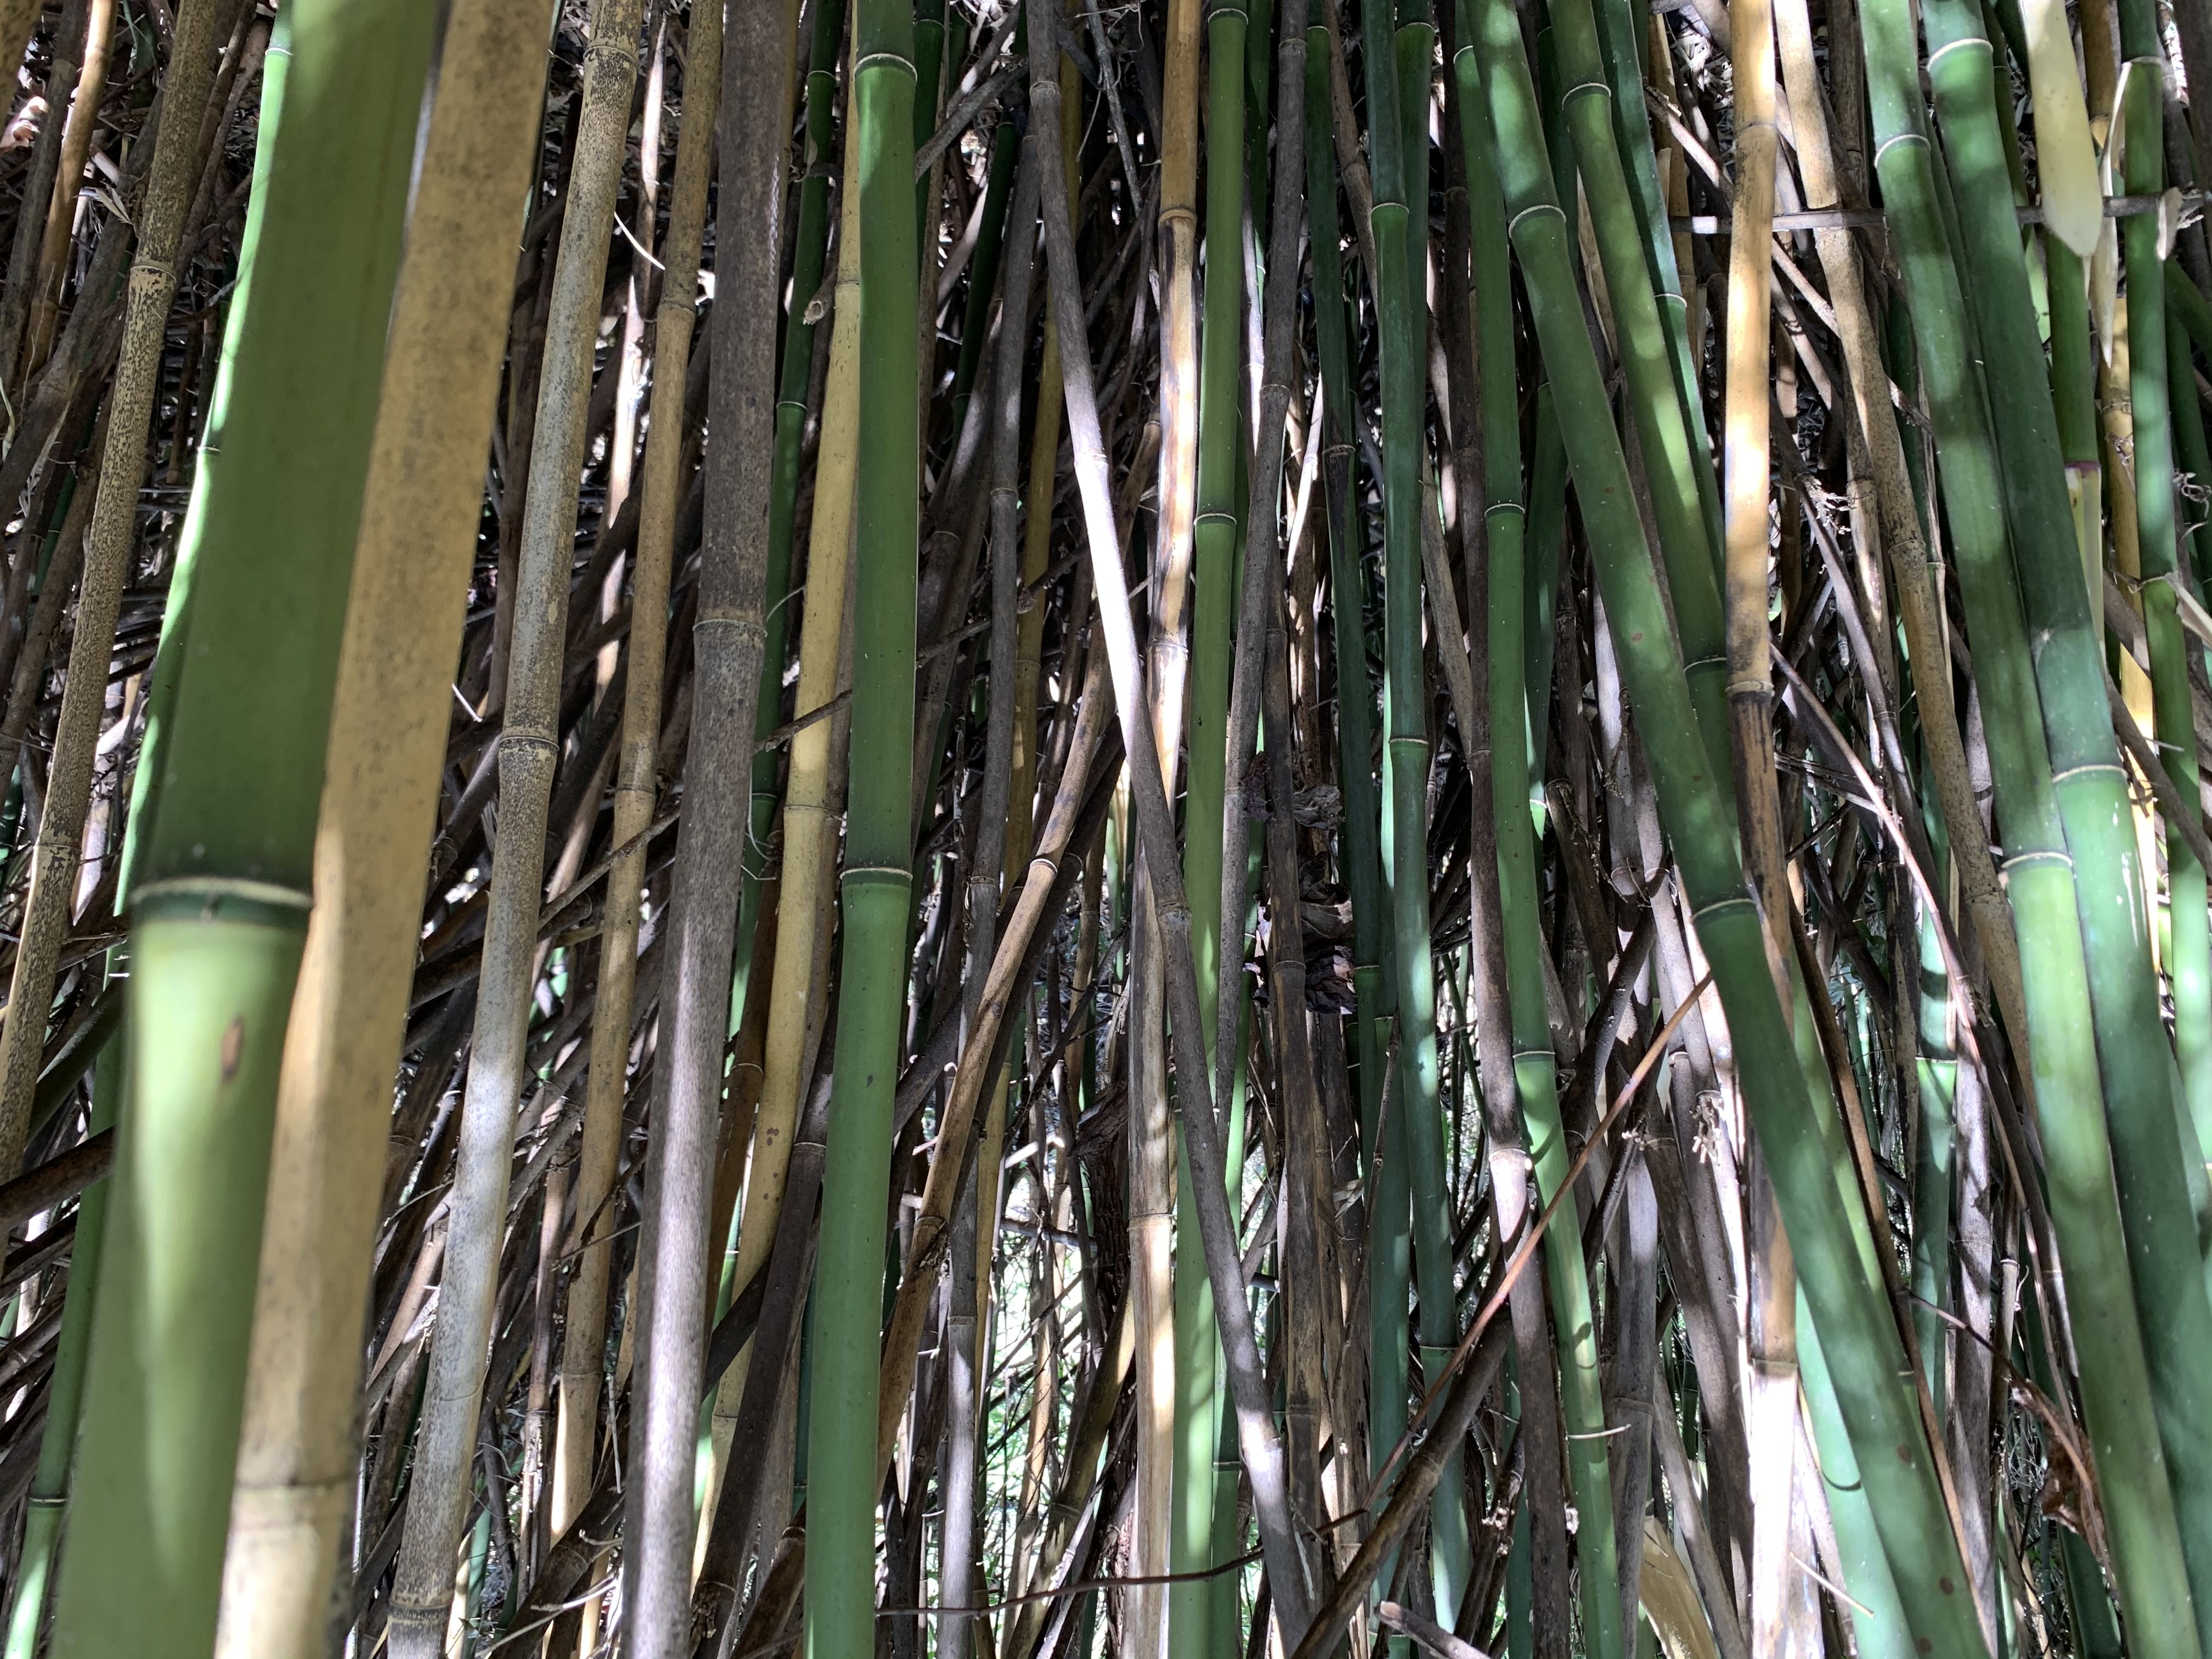 Close up of dense culms of rivercane, a native bamboo, both alive and dead